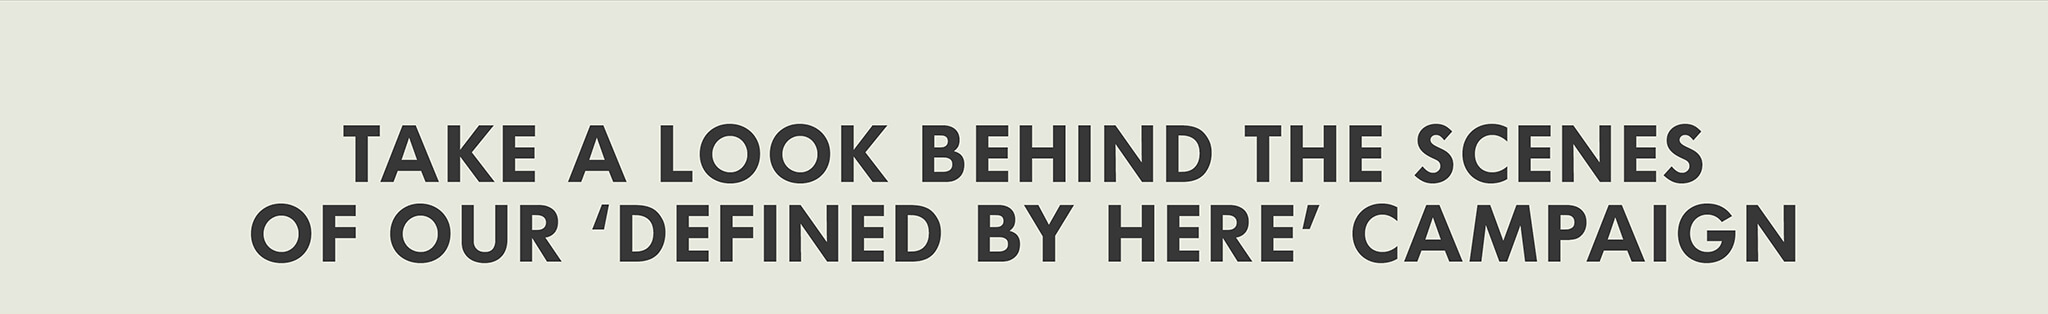 TAKE A LOOK BEHIND THE SCENES OF OUR DEFINED BY HERE CAMPAIGN